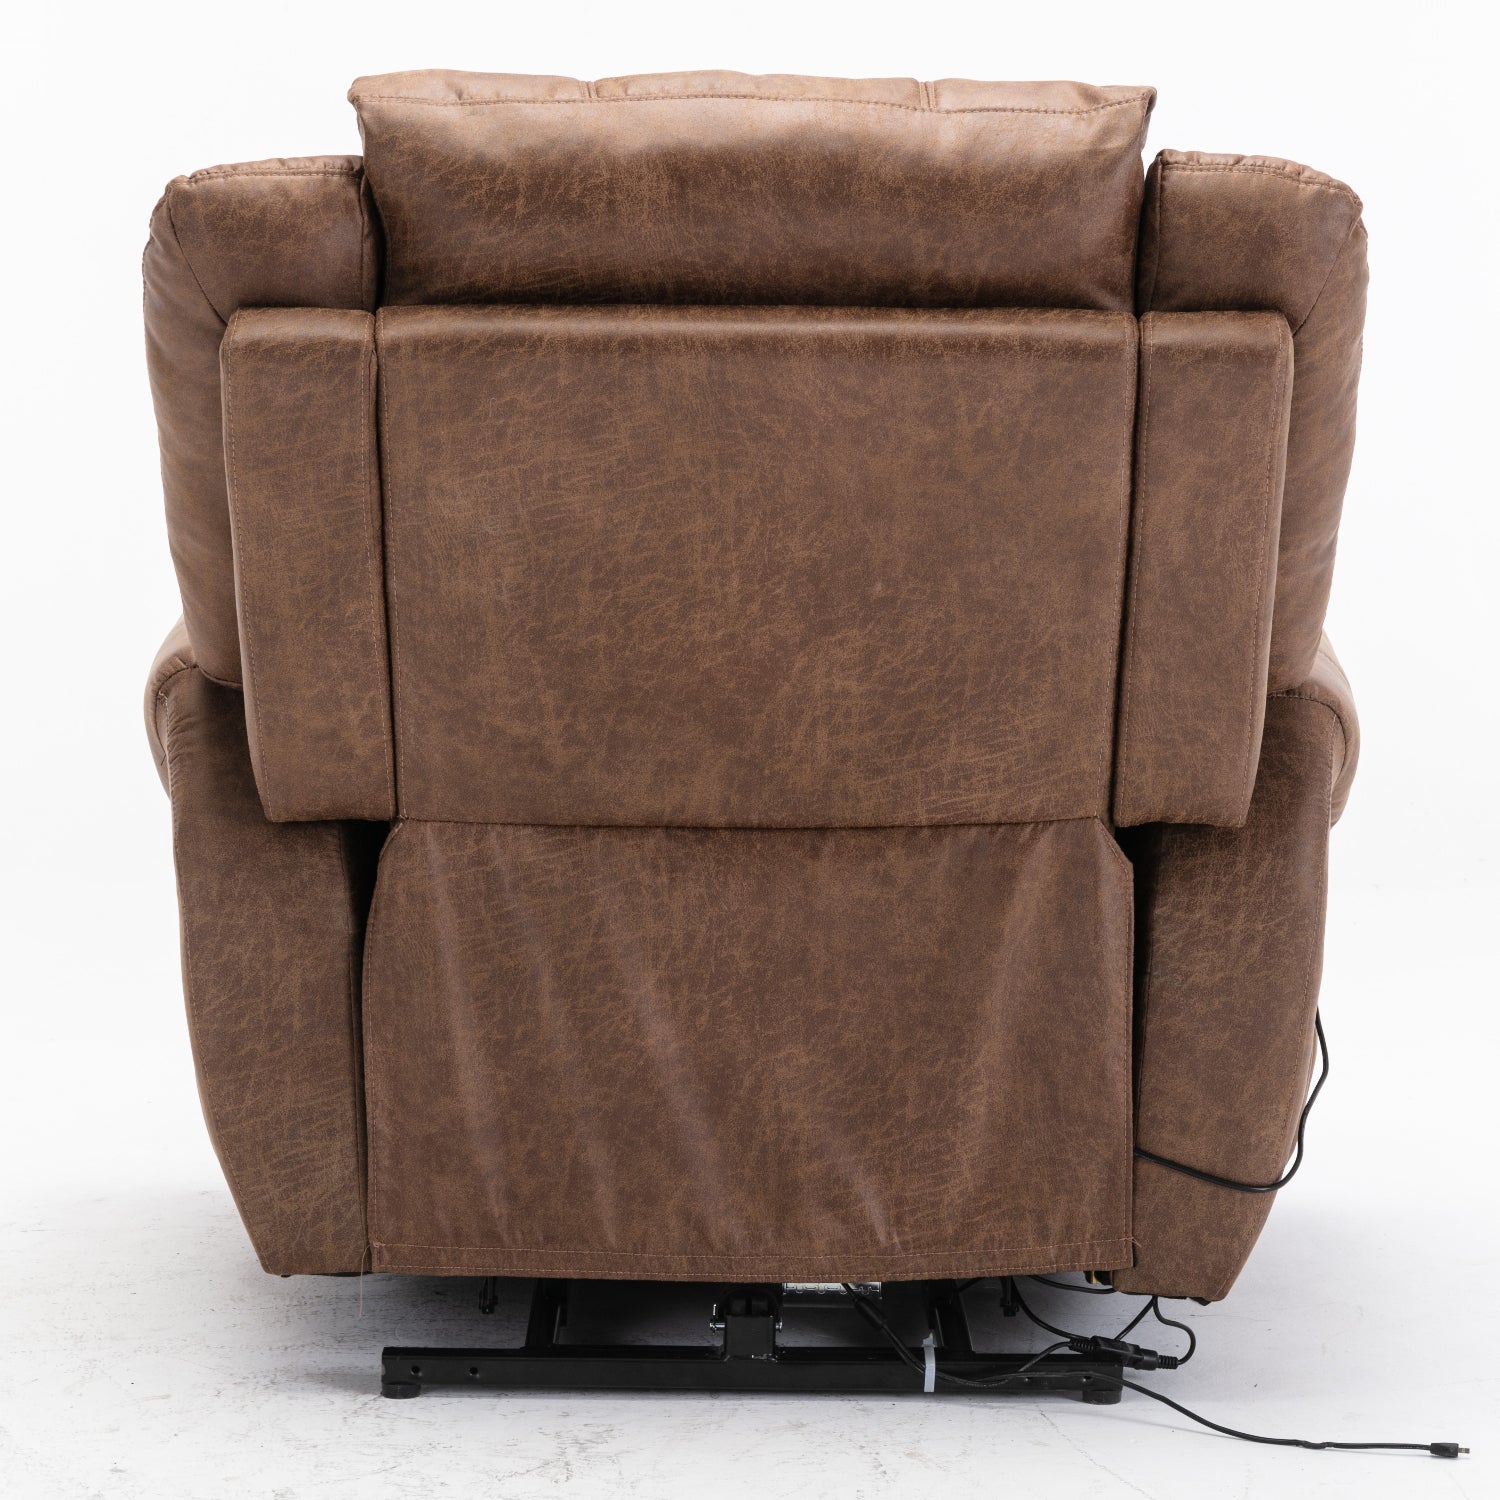 Nut Brown Power Lift Recliner Chair with Massage and Heat, back view